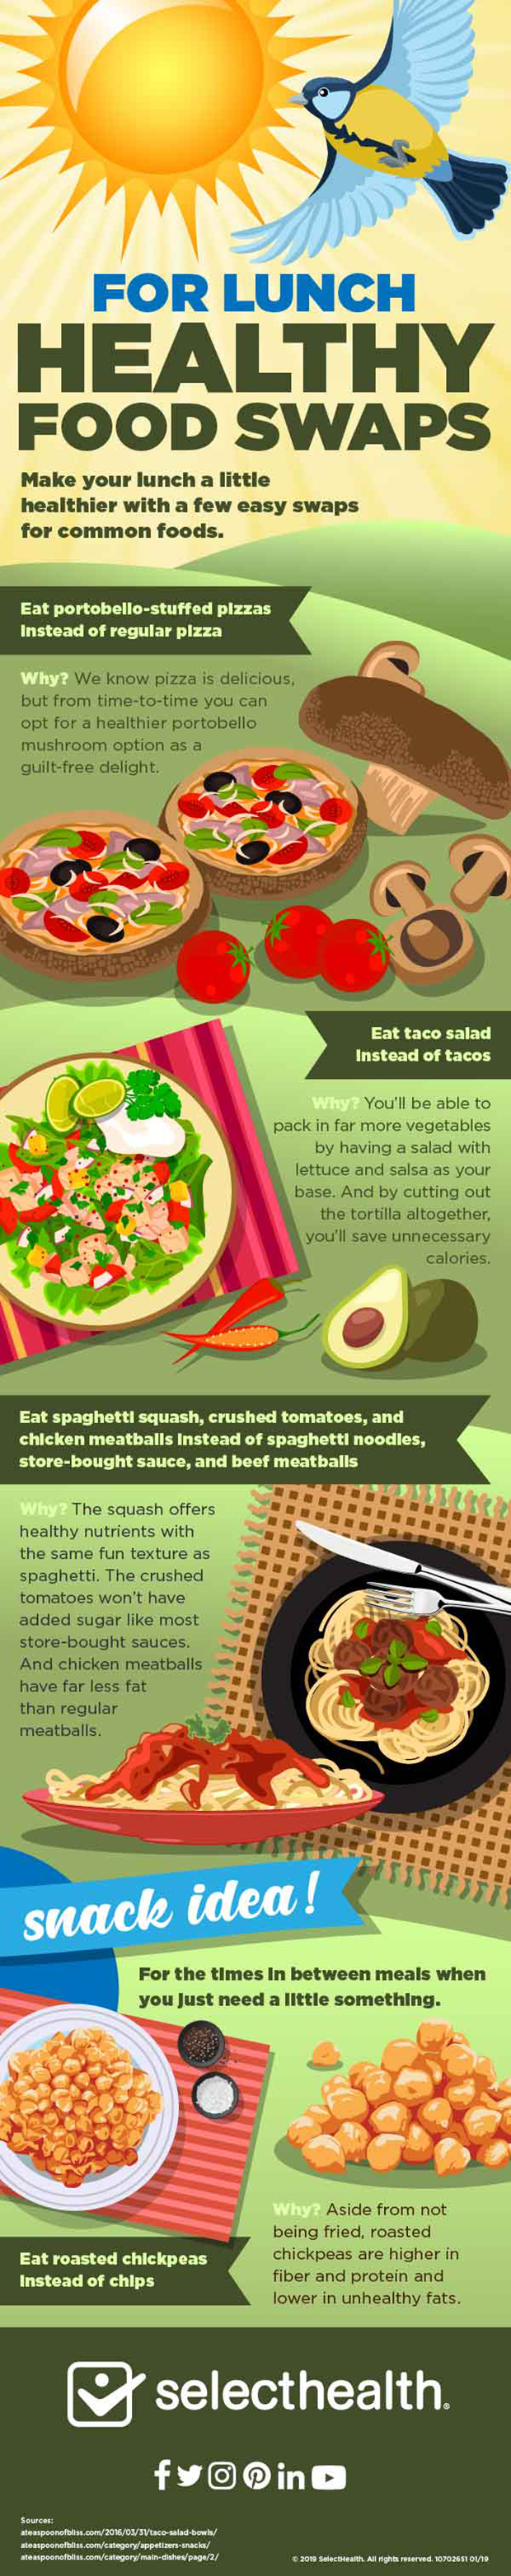 Infographic showing healthy food swaps for lunch